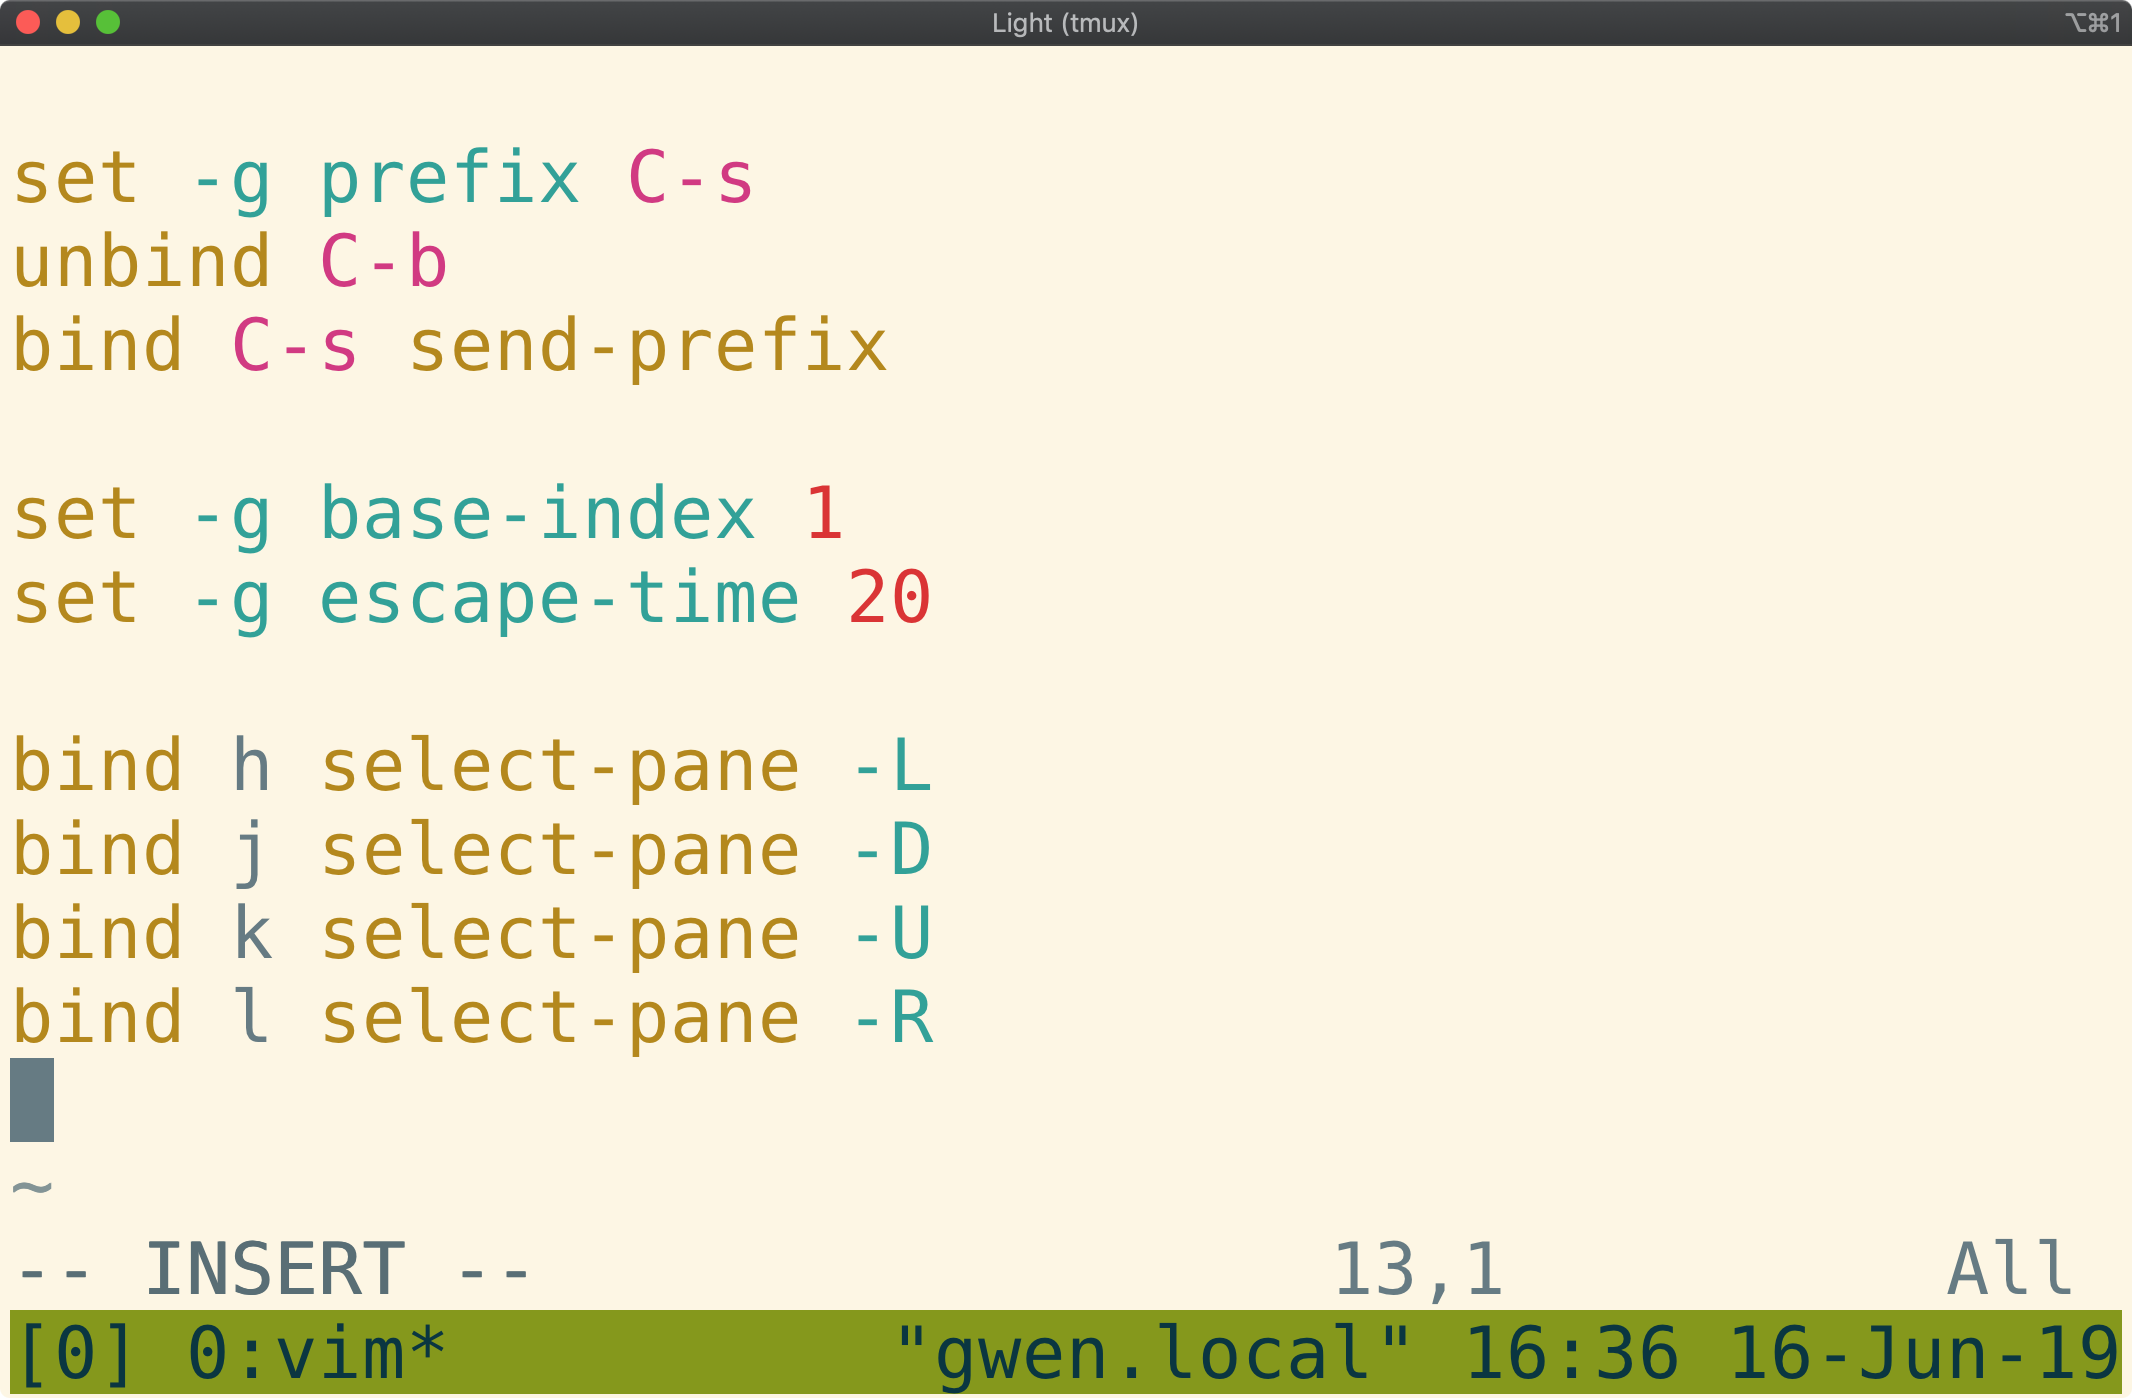 vim window showing binds for
select-pane